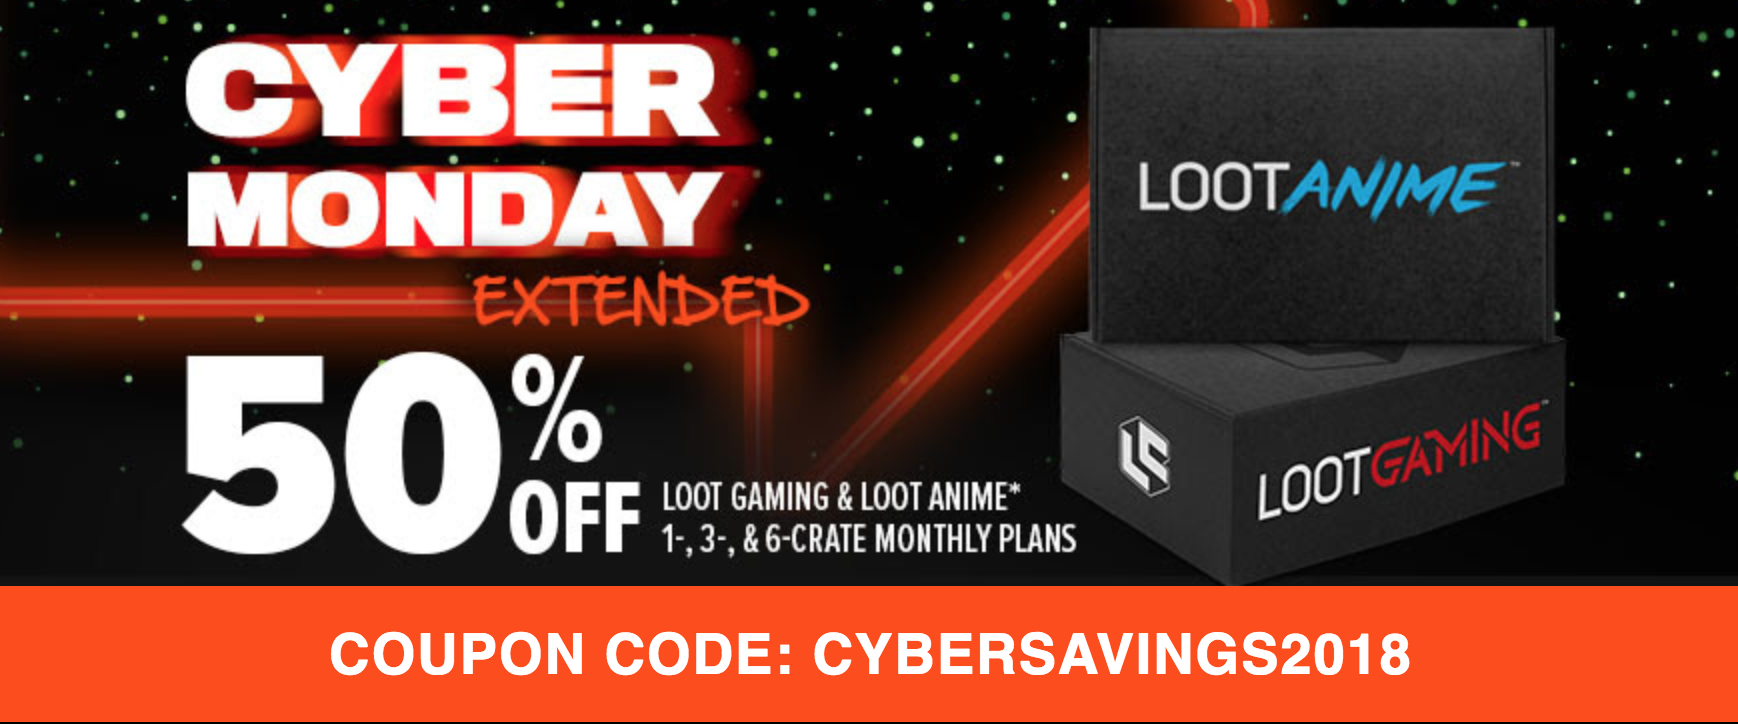 Today Only! Loot Crate Cyber Monday Extended Sale – Save 50% Off Loot Anime & Loot Gaming!